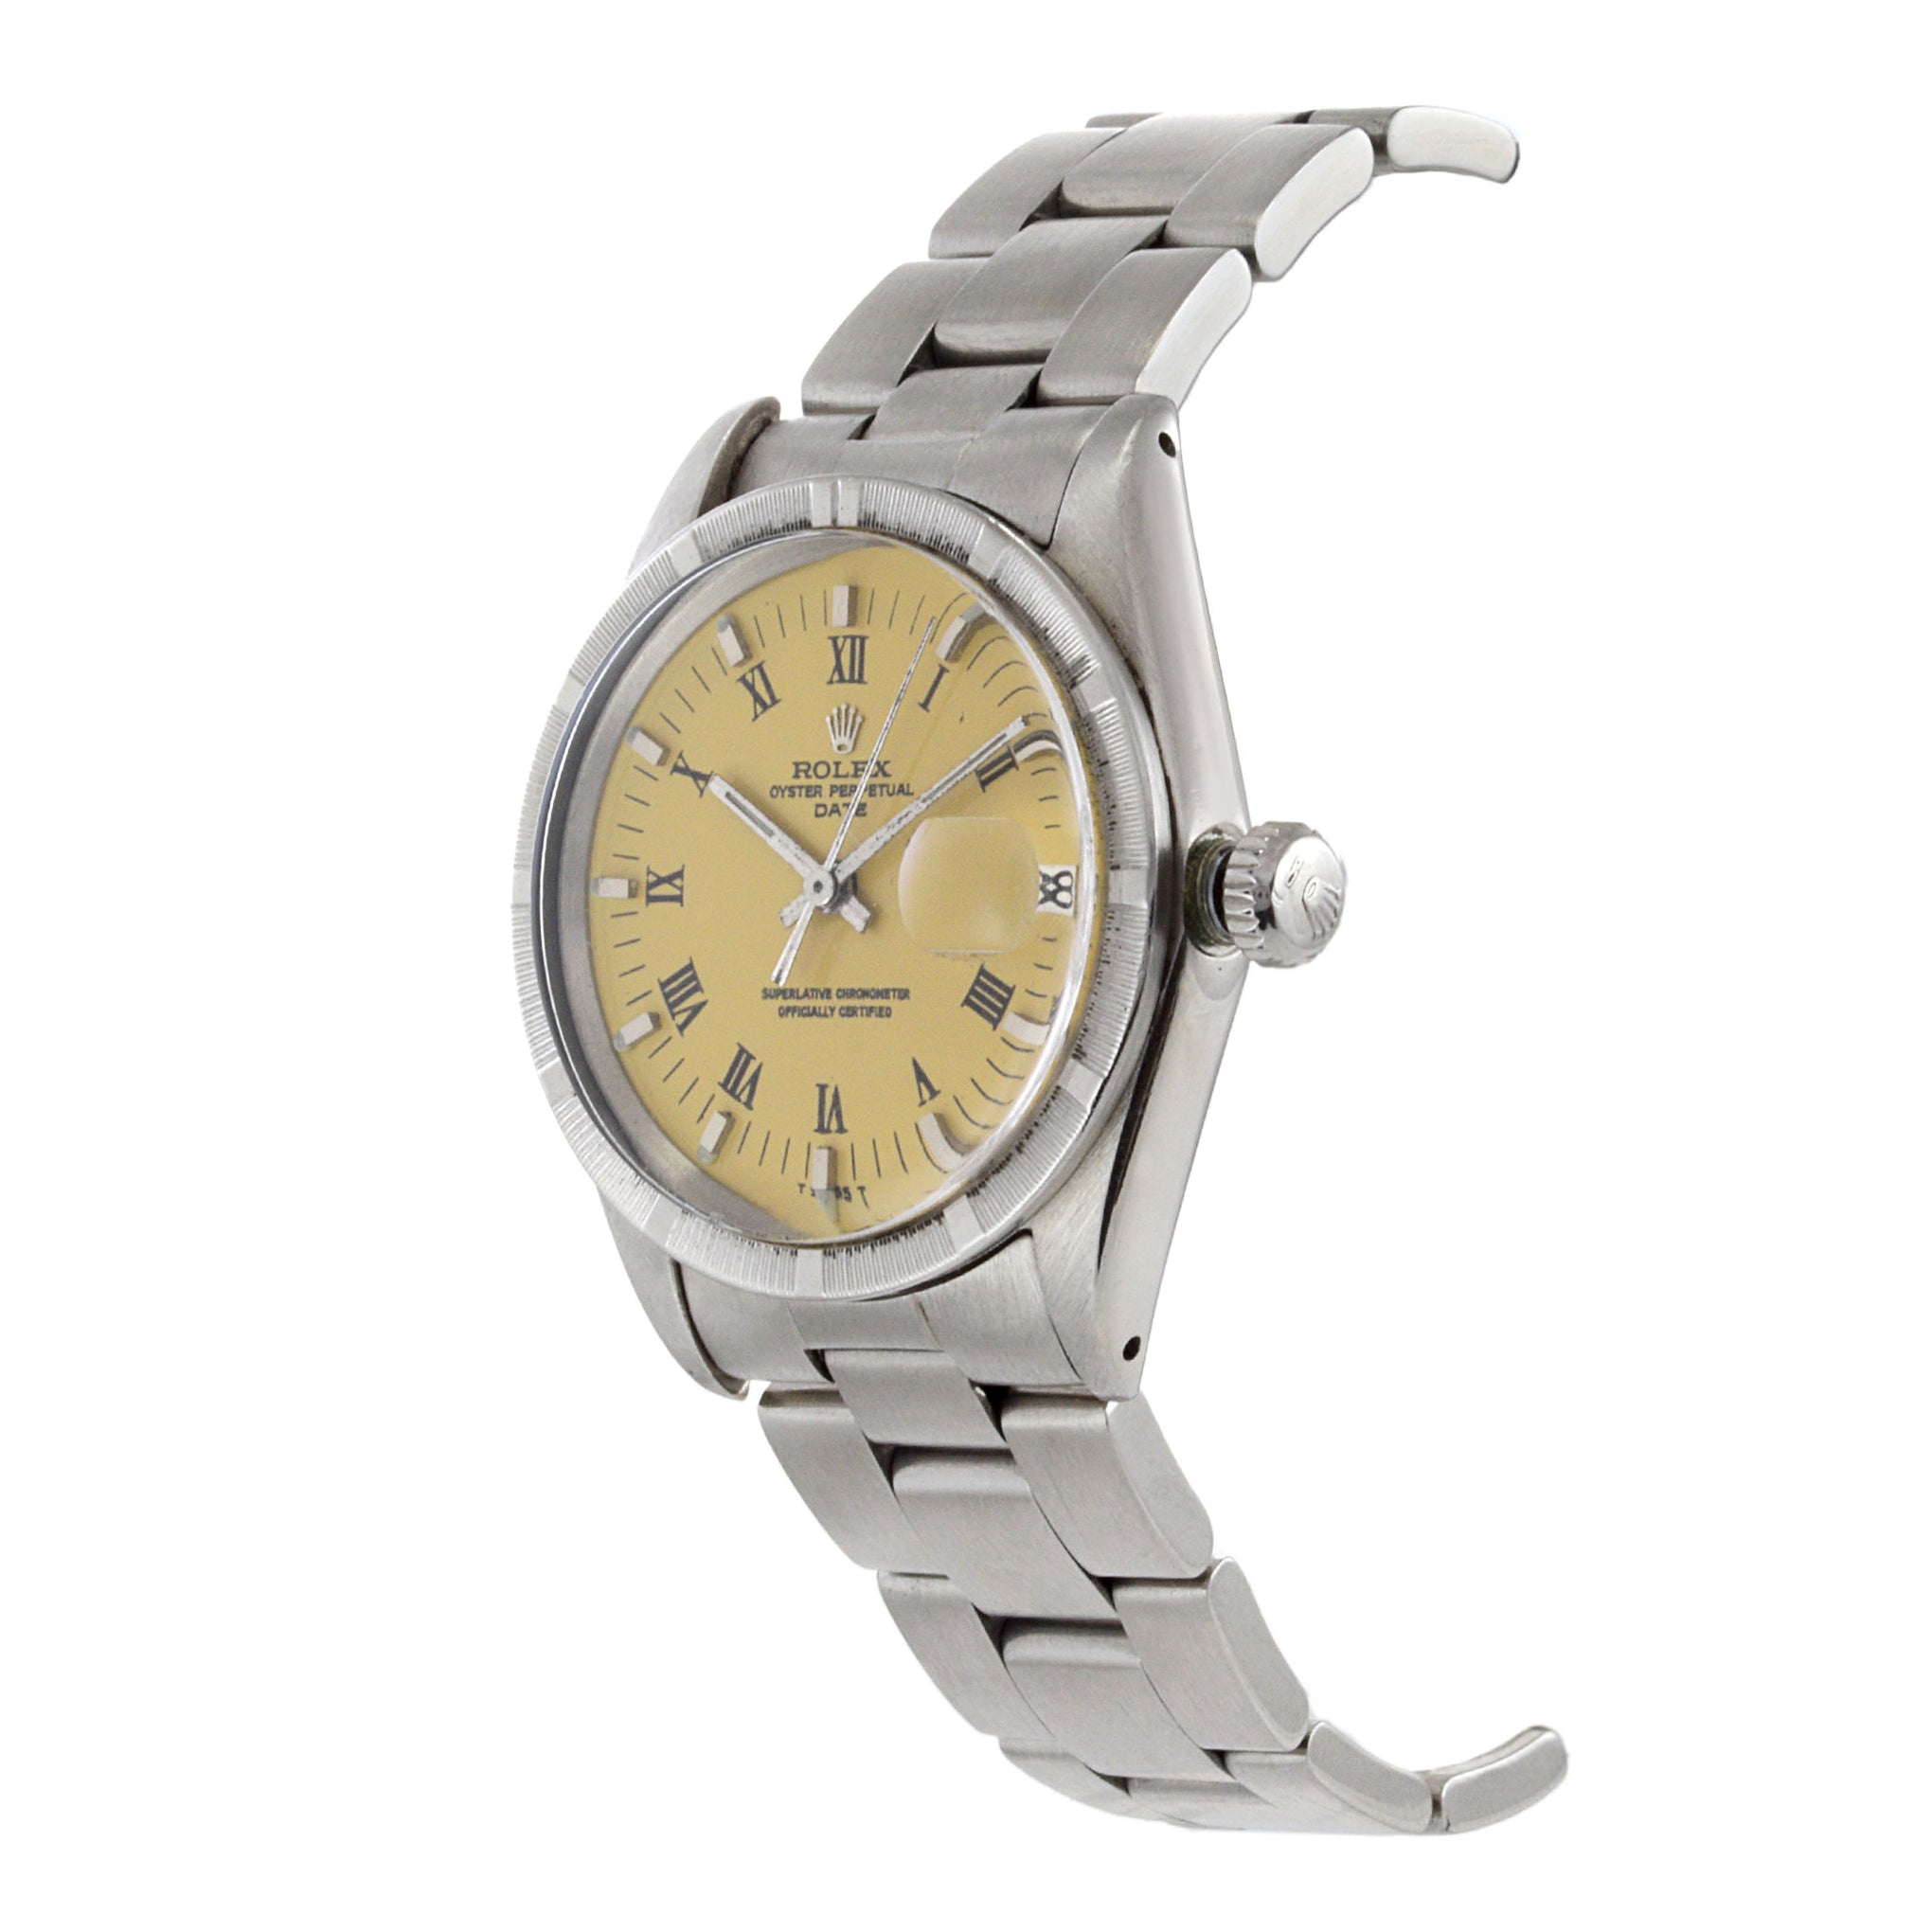 Vintage 1967 Rolex Date Reference 1500 Custom Yellow Dial Automatic Watch